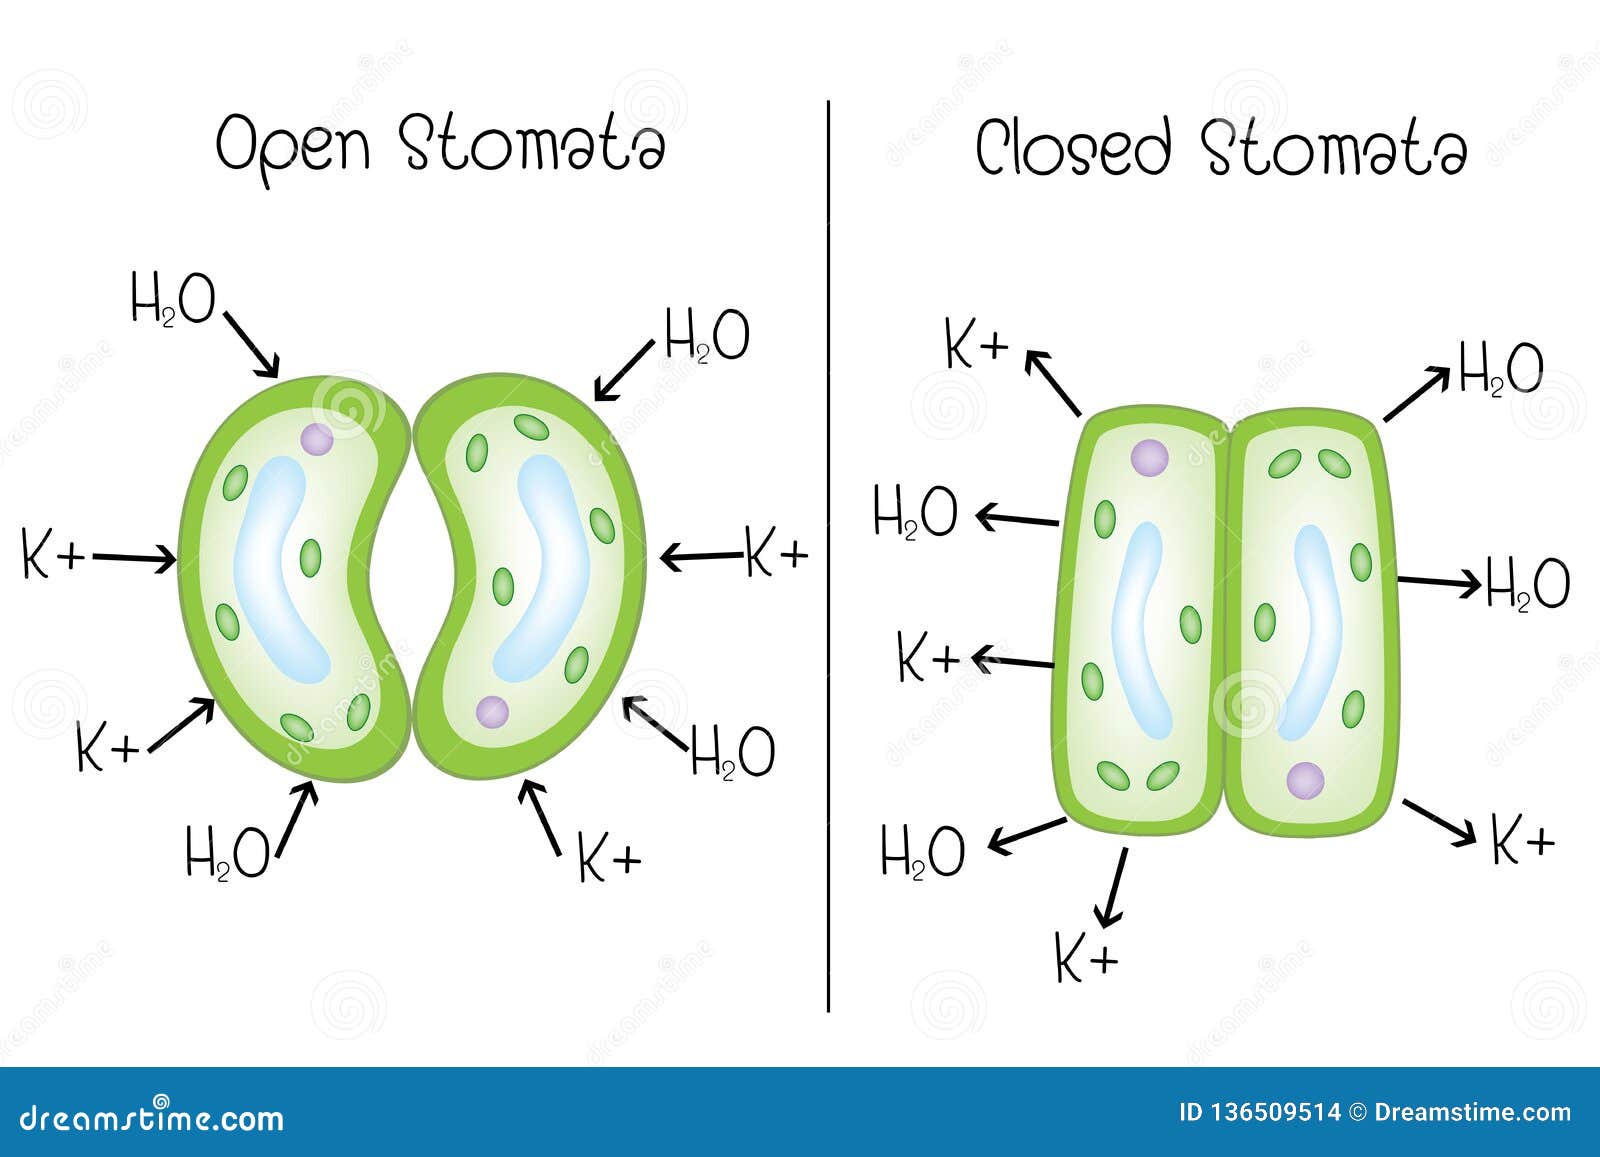 stoma open and stoma closed